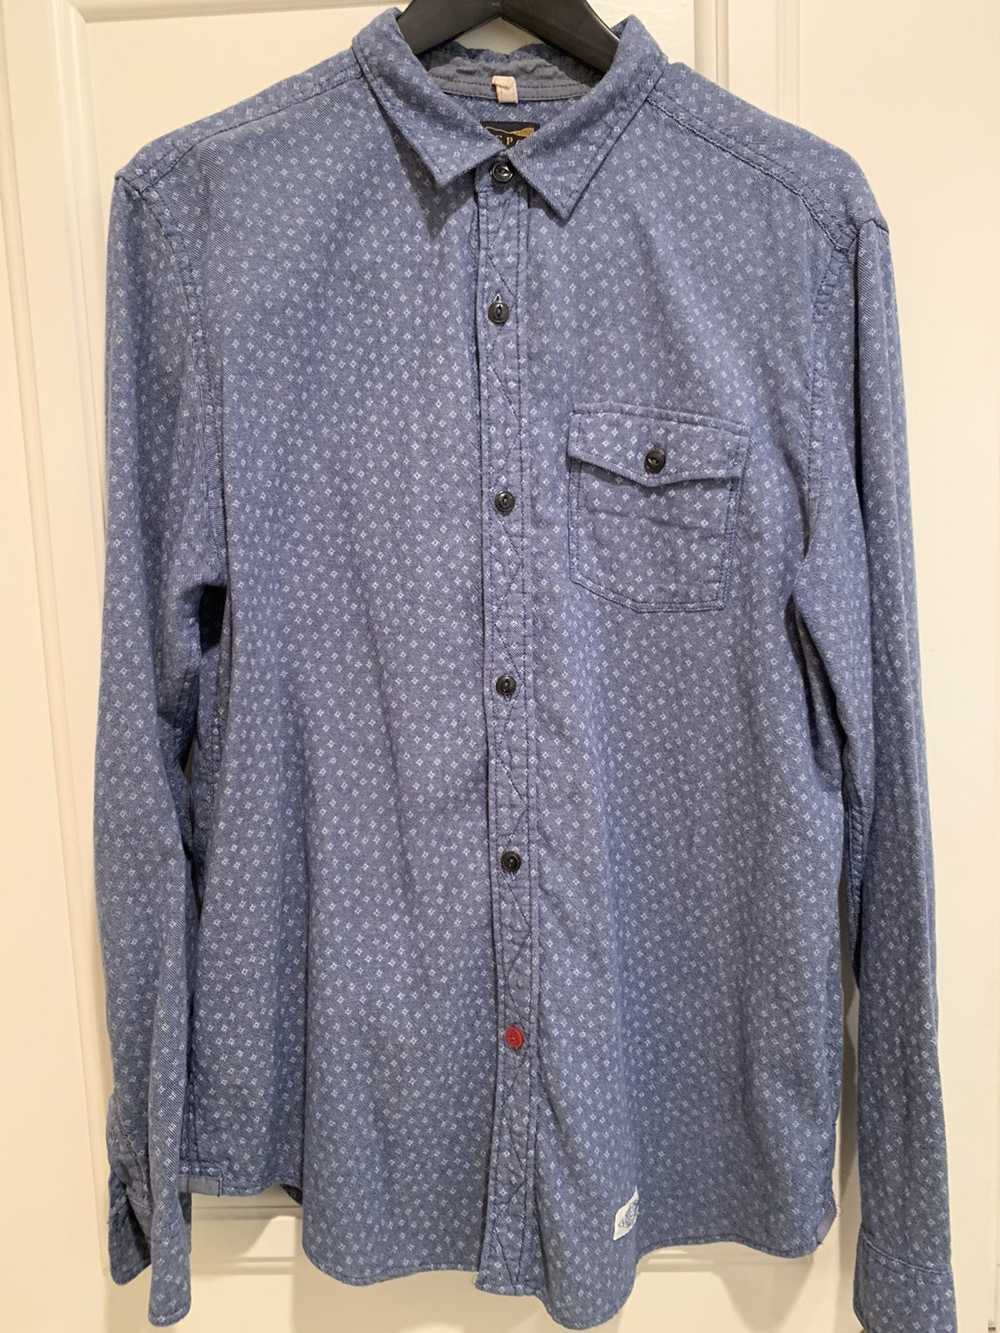 Cpo Long sleeve button up - image 1